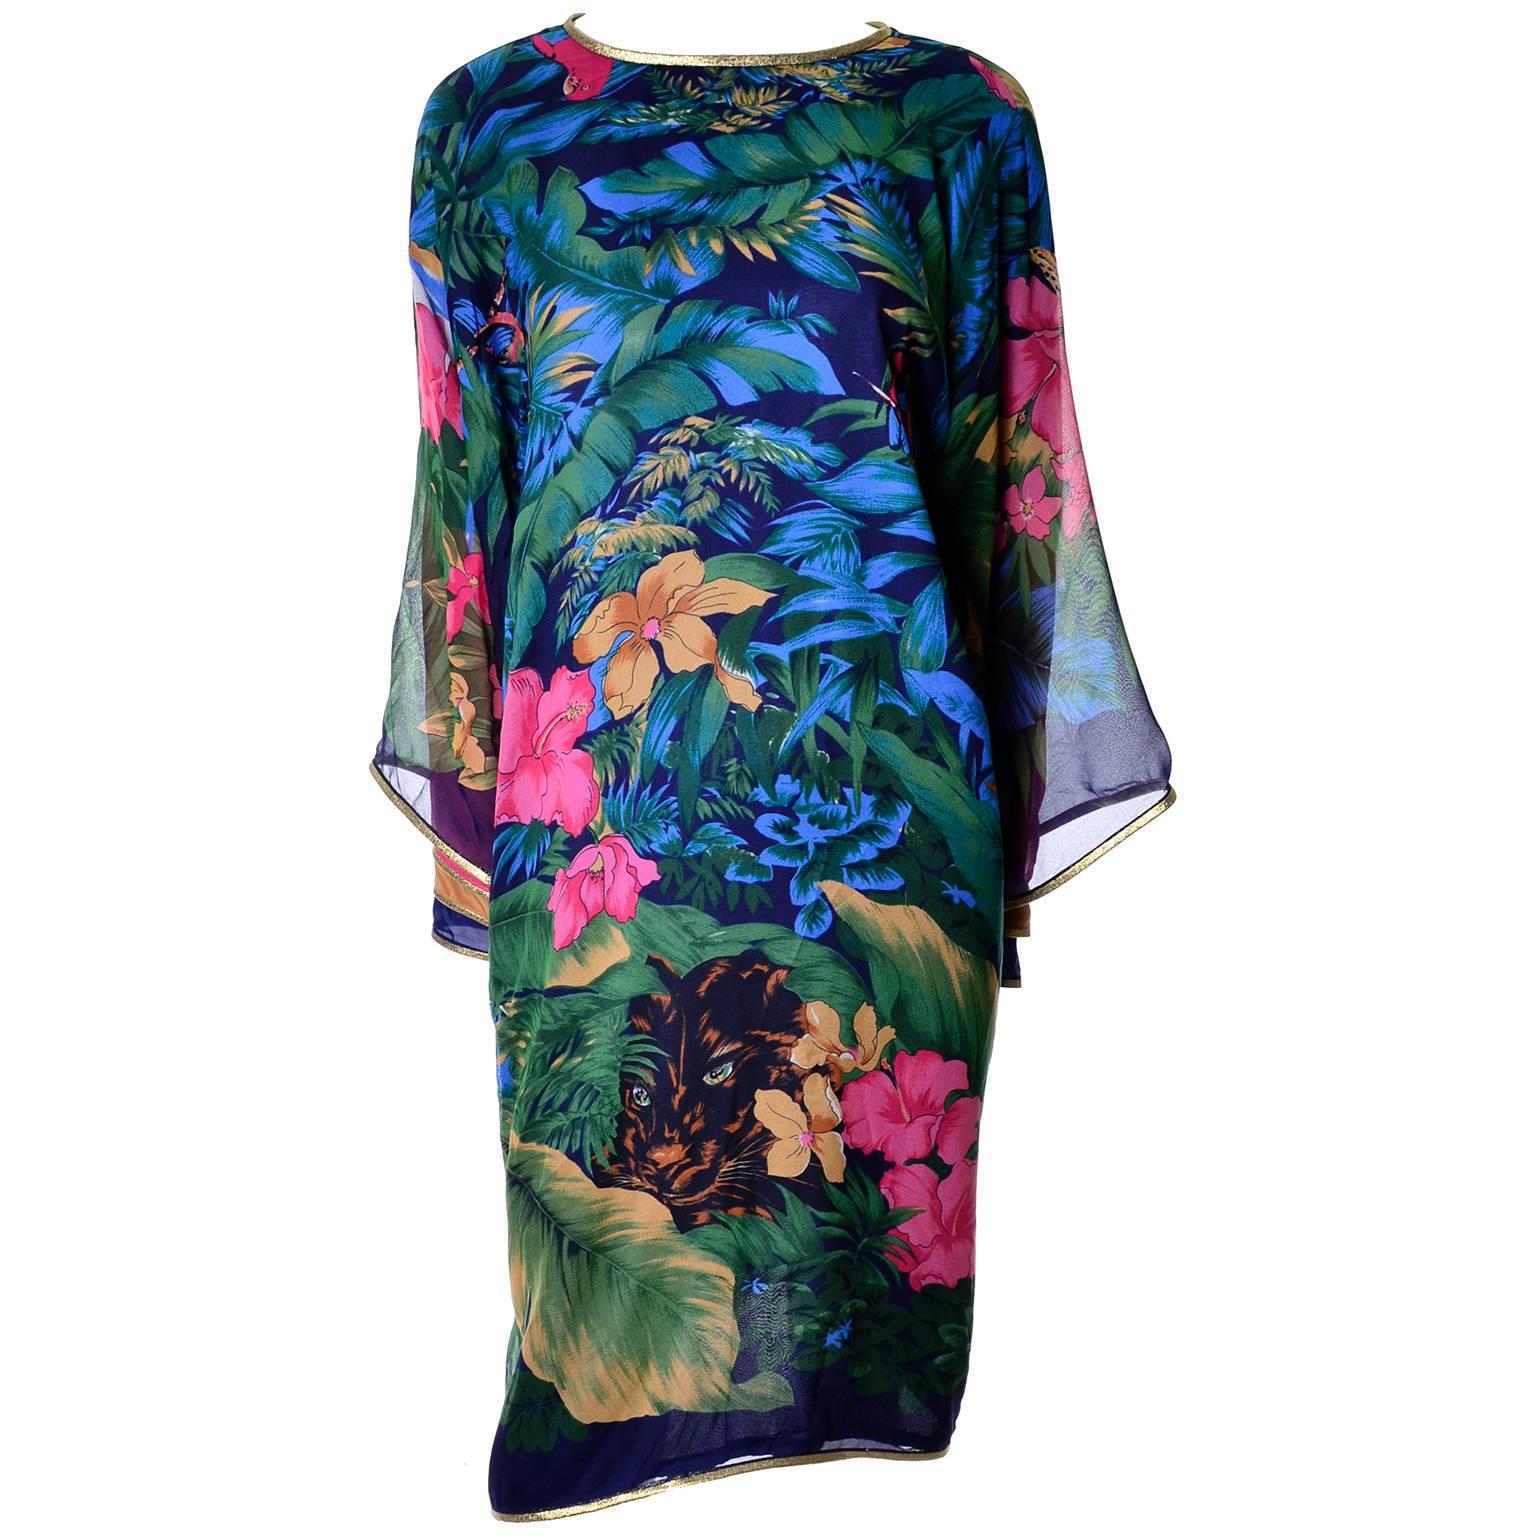 This is an outstanding vintage caftan style dress in a beautiful silk chiffon floral print with navy blue lining.  The dress ties at the back of the neck with gold ties that have jeweled tassels on the ends and the back is somewhat open to the